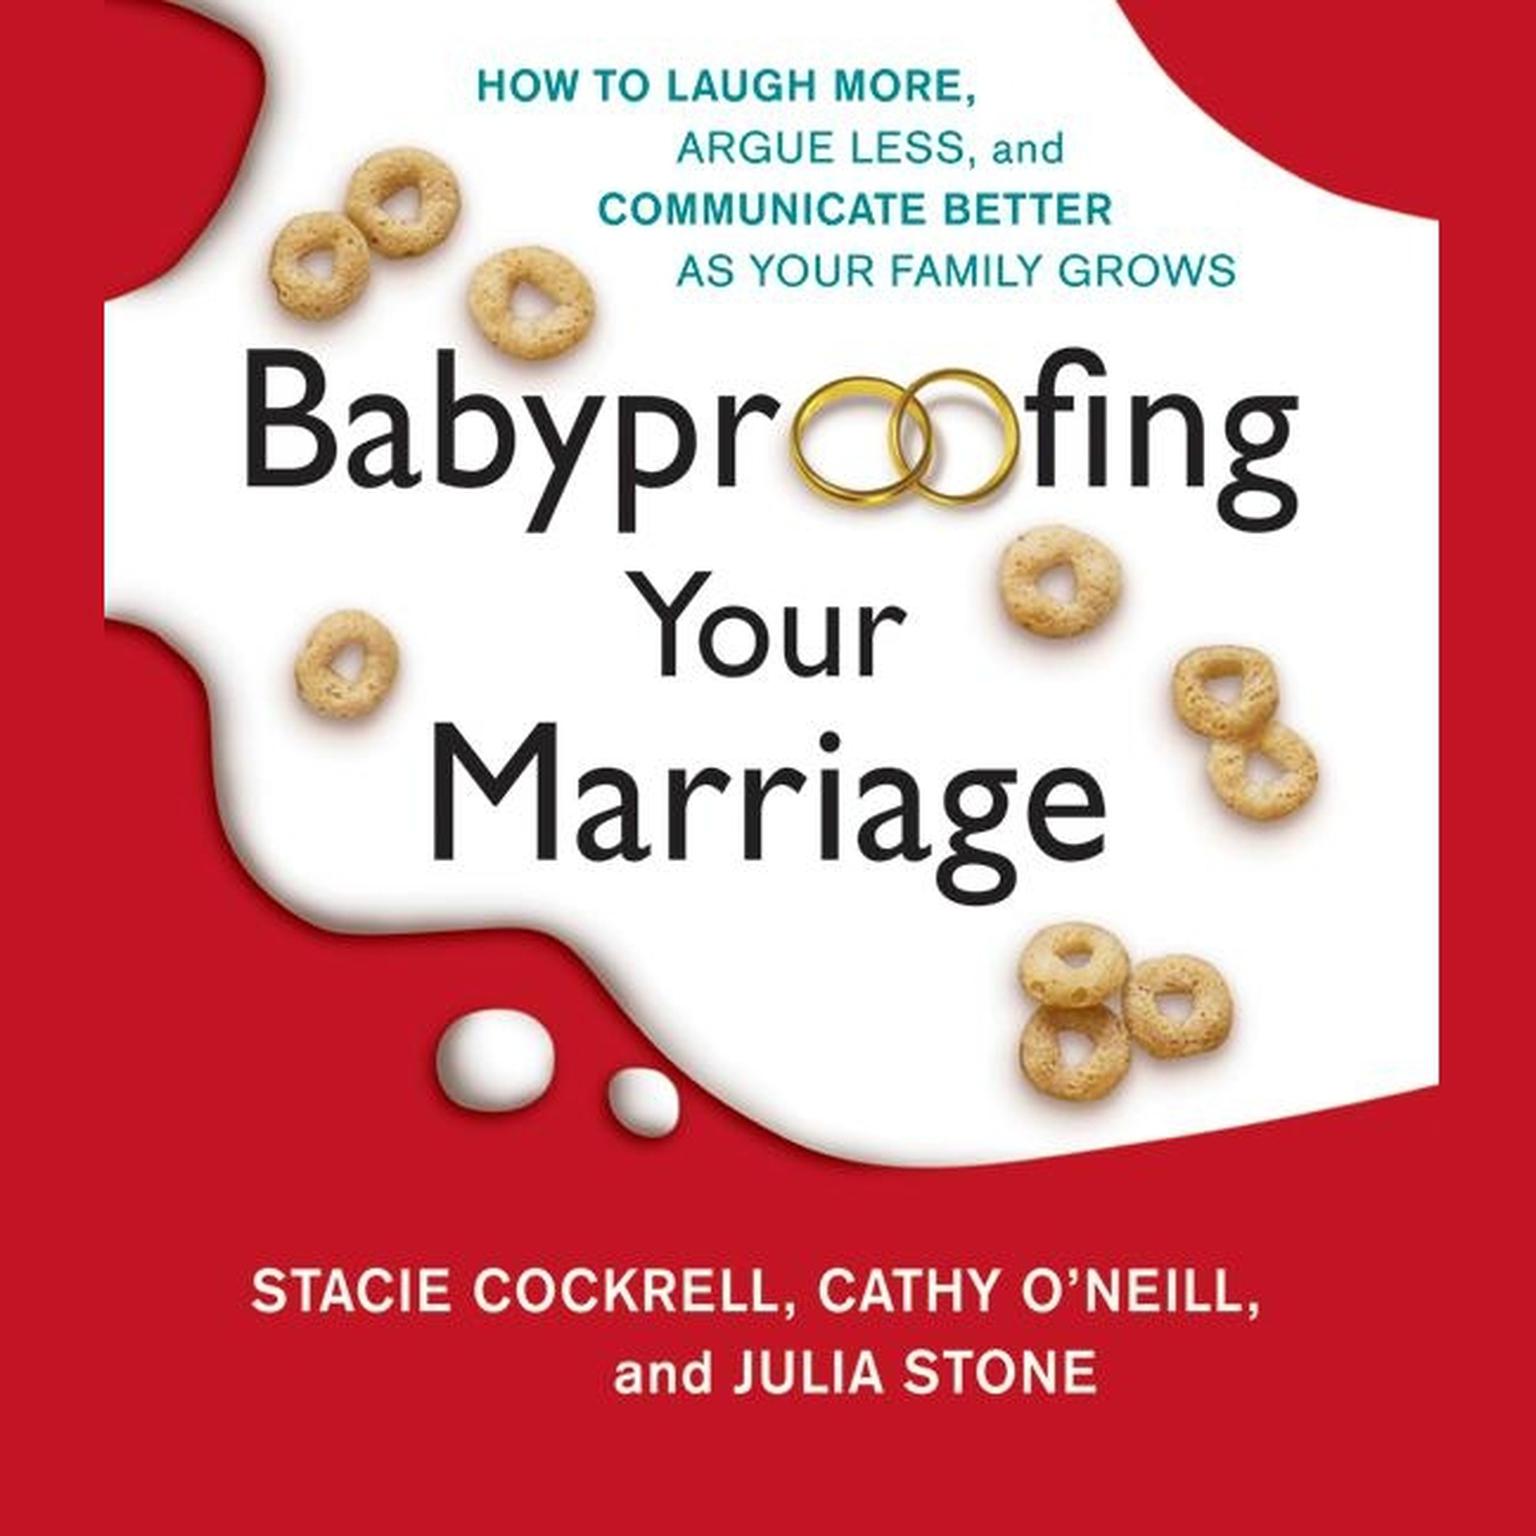 Babyproofing Your Marriage (Abridged): How to Laugh More, Argue Less, and Communicate Better as Your Family Grows Audiobook, by Stacie Cockrell